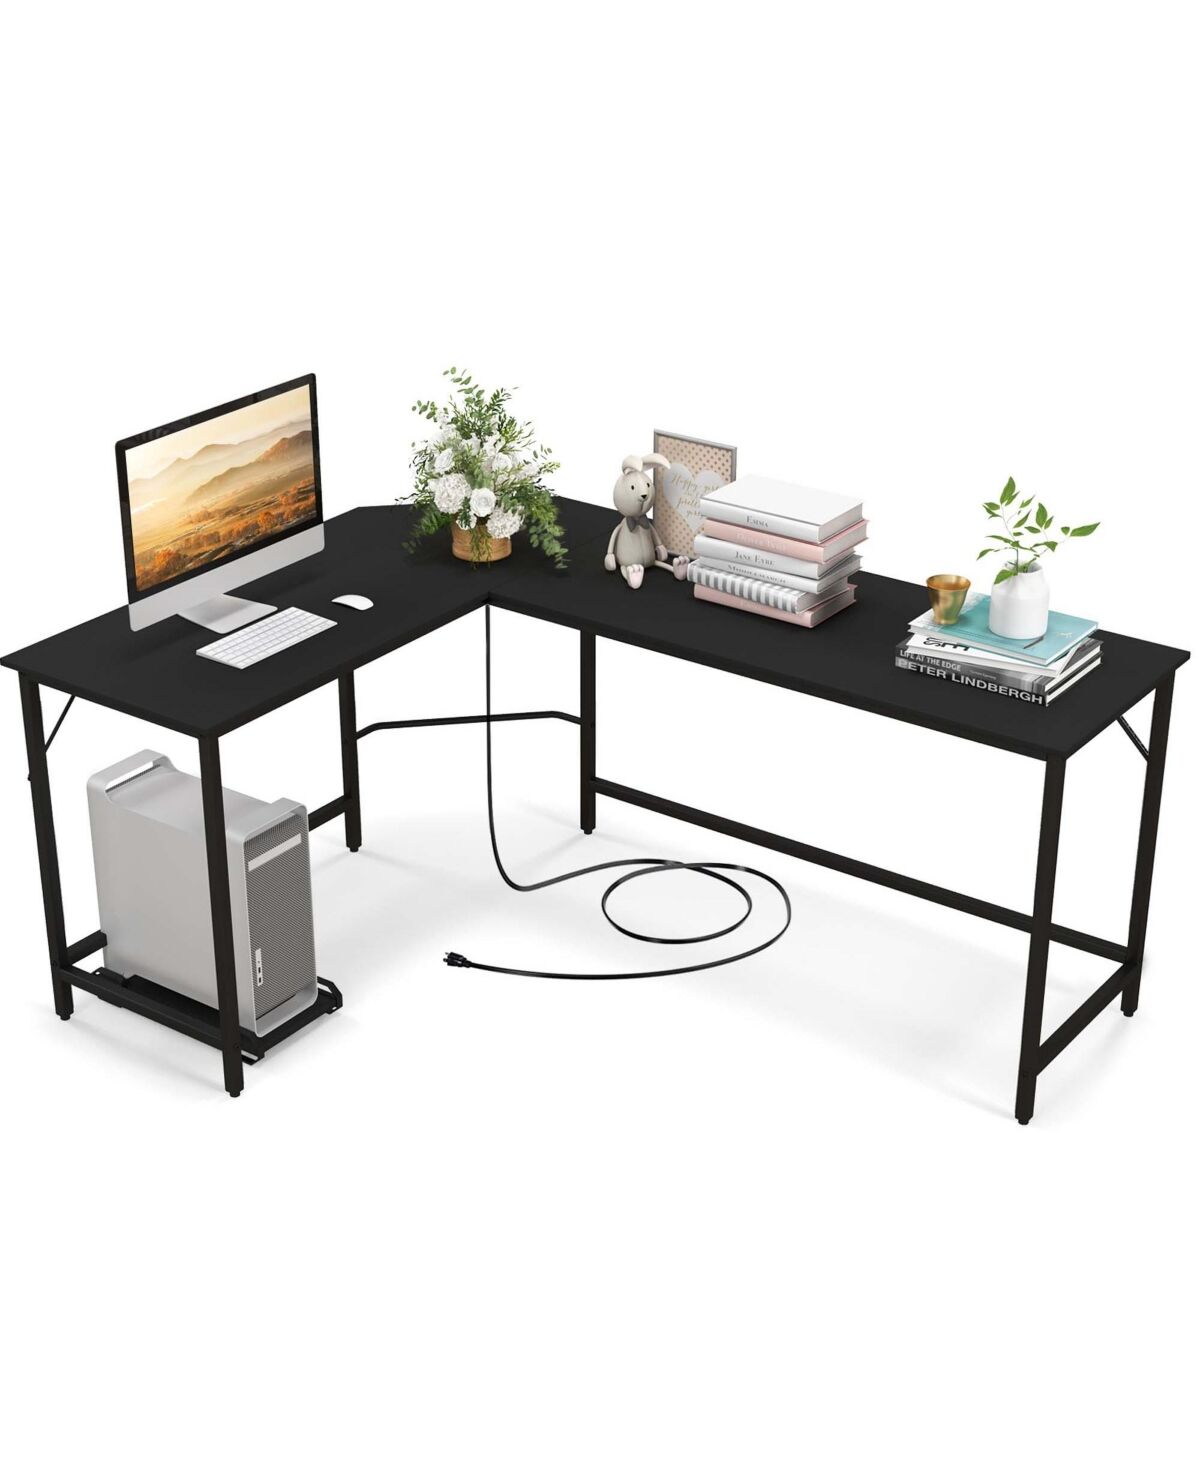 Costway L-shaped Gaming Desk Computer Desk with Cpu Stand Power Outlets - Black